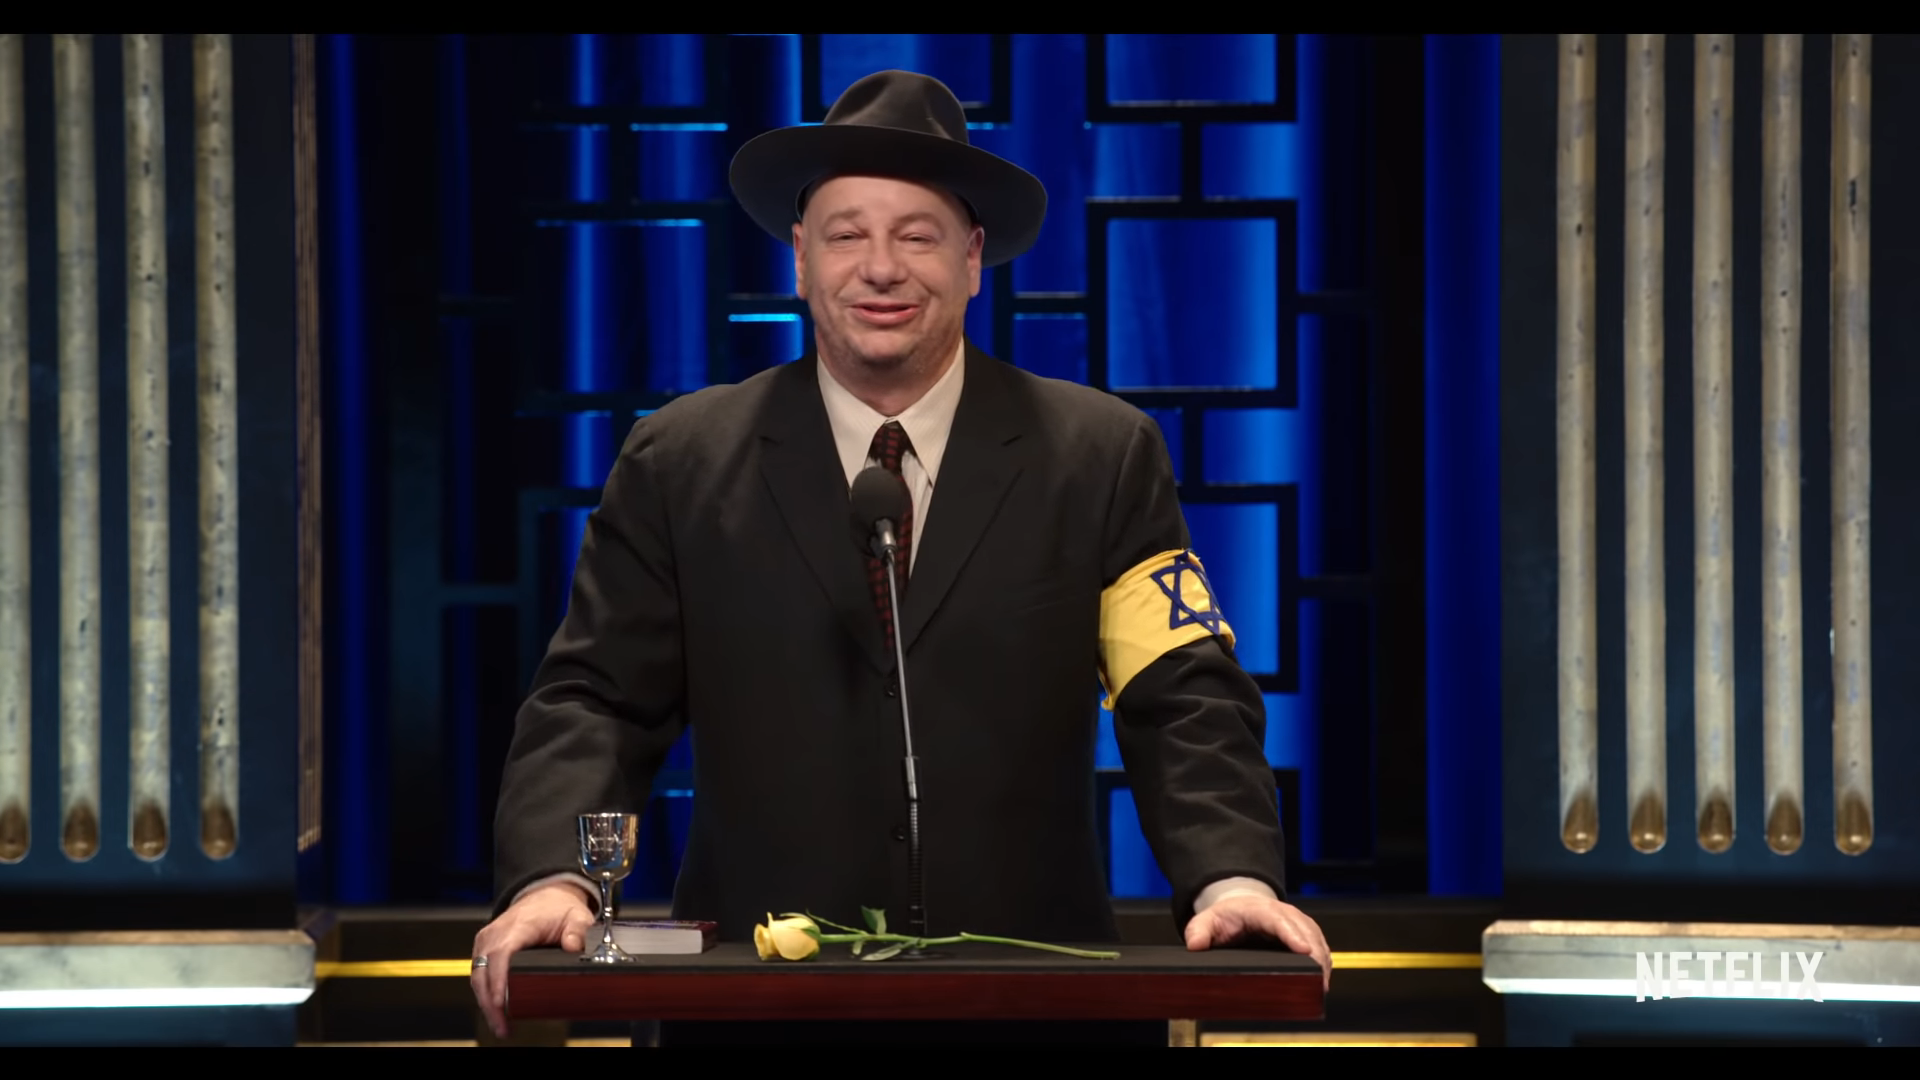 Historical Roasts with Jeff Ross Netflix, Netflix Comedy Specials, Netflix Comedies, Netflix Jeff Ross Special, Coming to Netflix in May